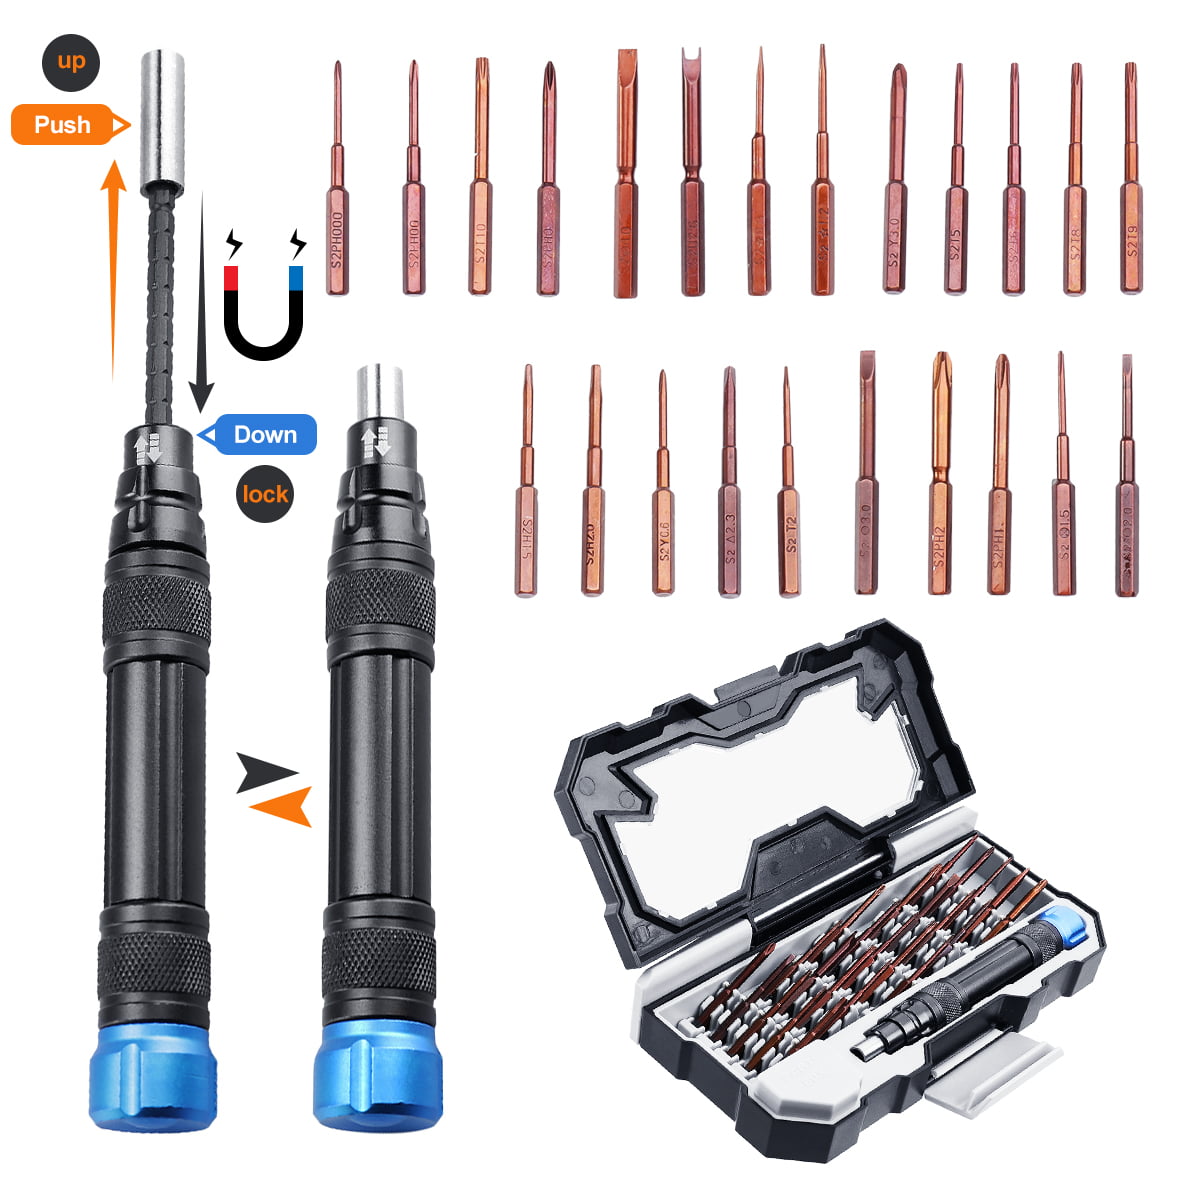 24 in 1 Precision Screwdriver Set, Magnetic Driver Kit, Upgraded S2 ...